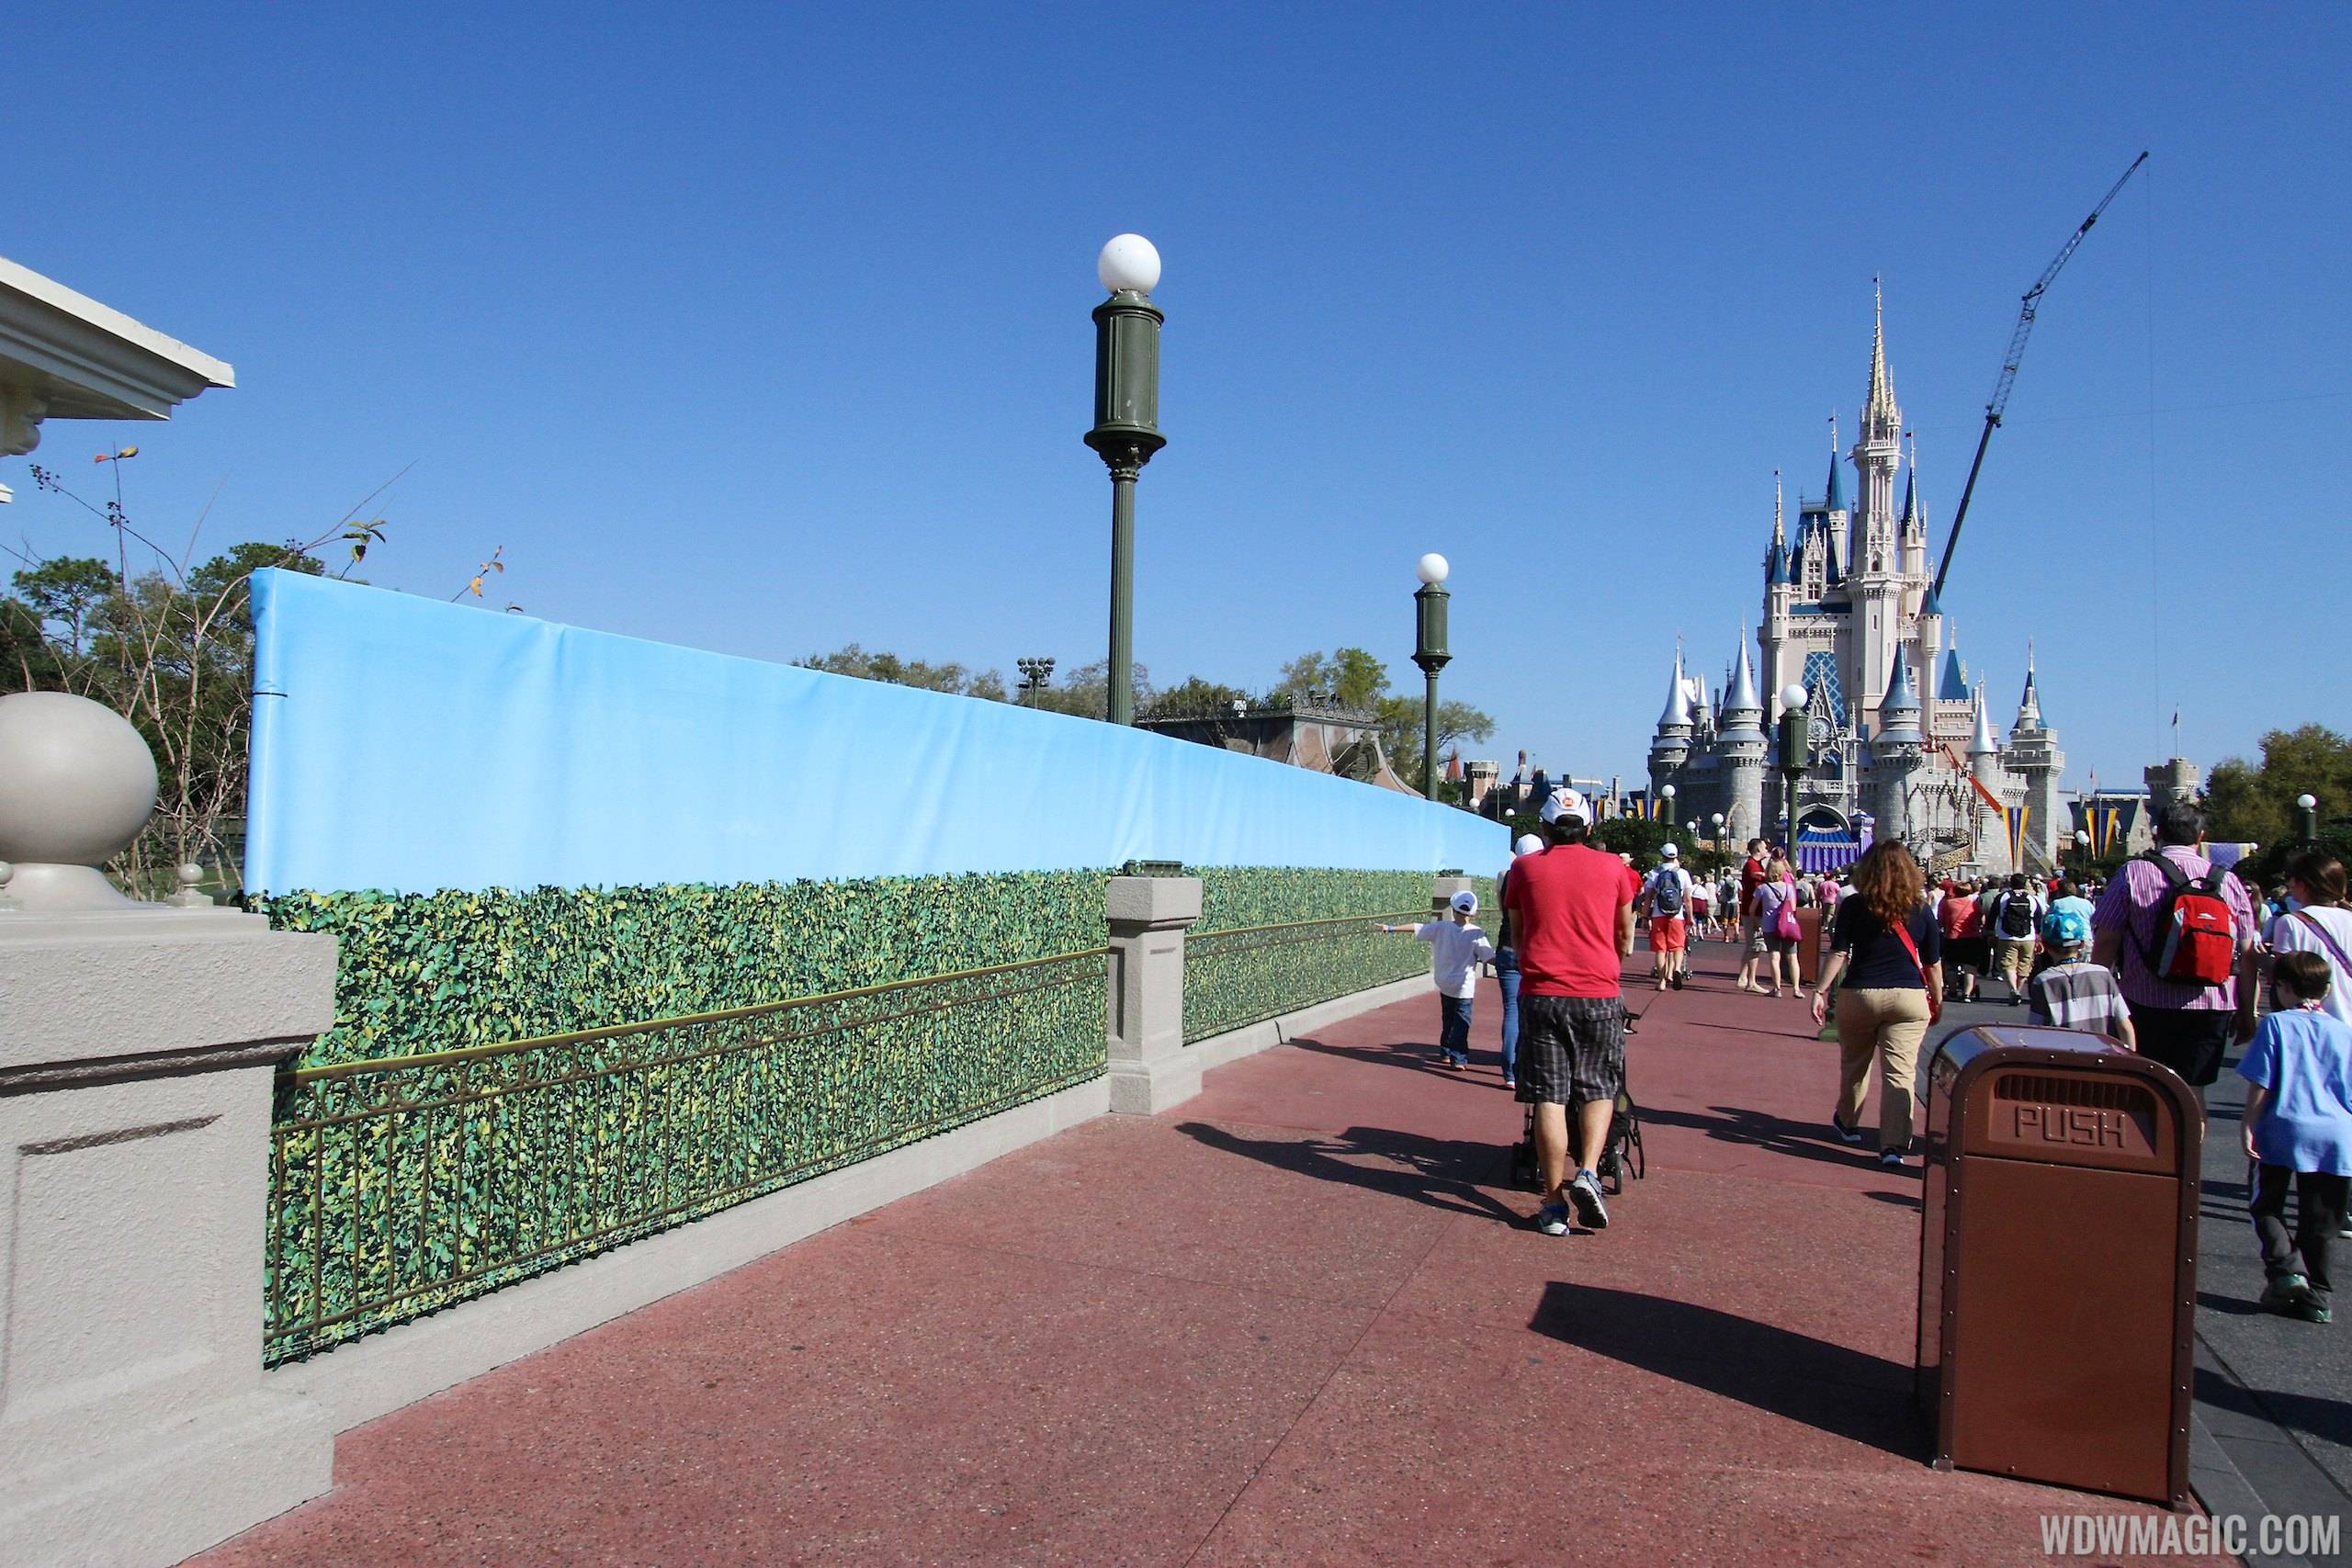 PHOTOS - Swan Boat landing demolished and more walls up around Main Street U.S.A. as part of hub redevelopment at the Magic Kingdom